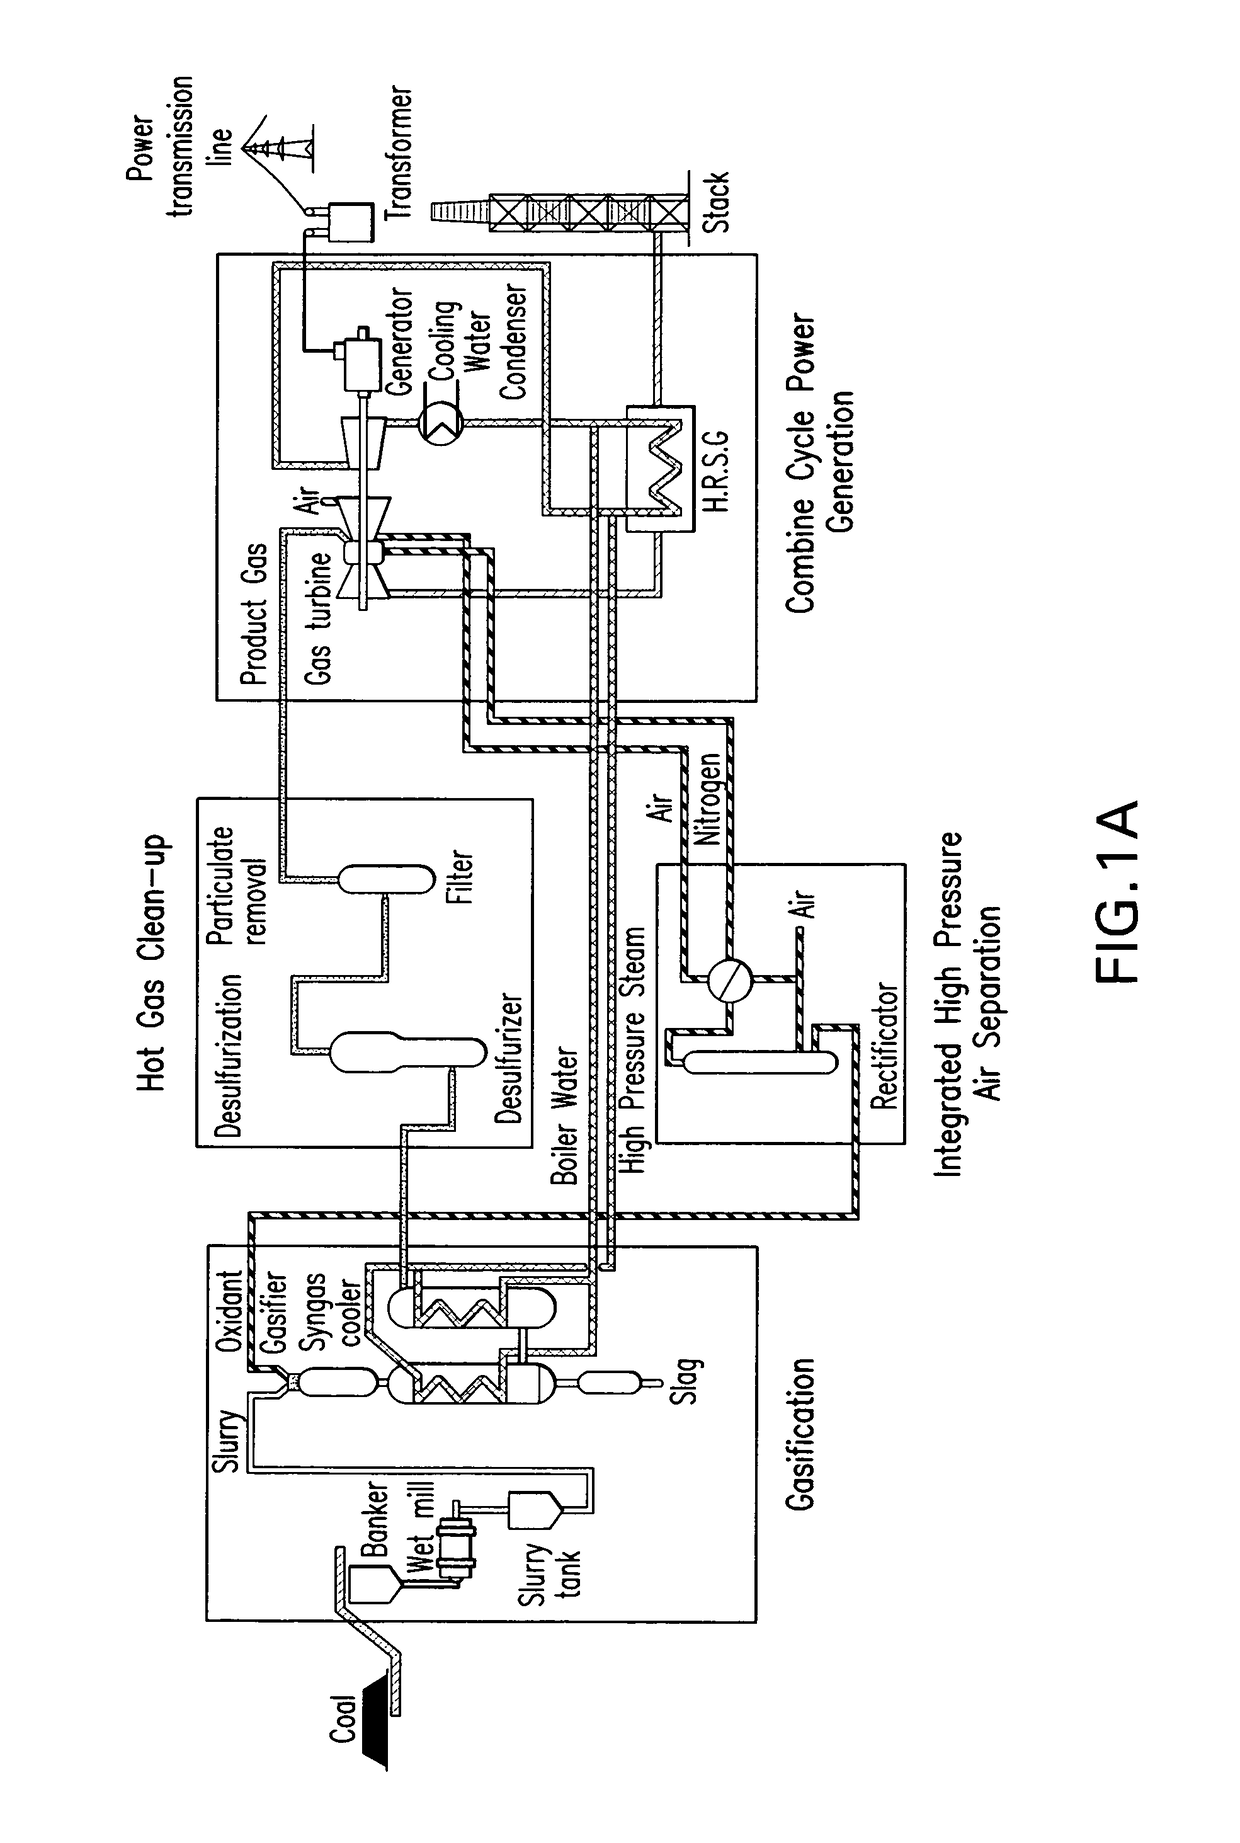 Method and apparatus for removing carbon dioxide gas from coal combustion power plants